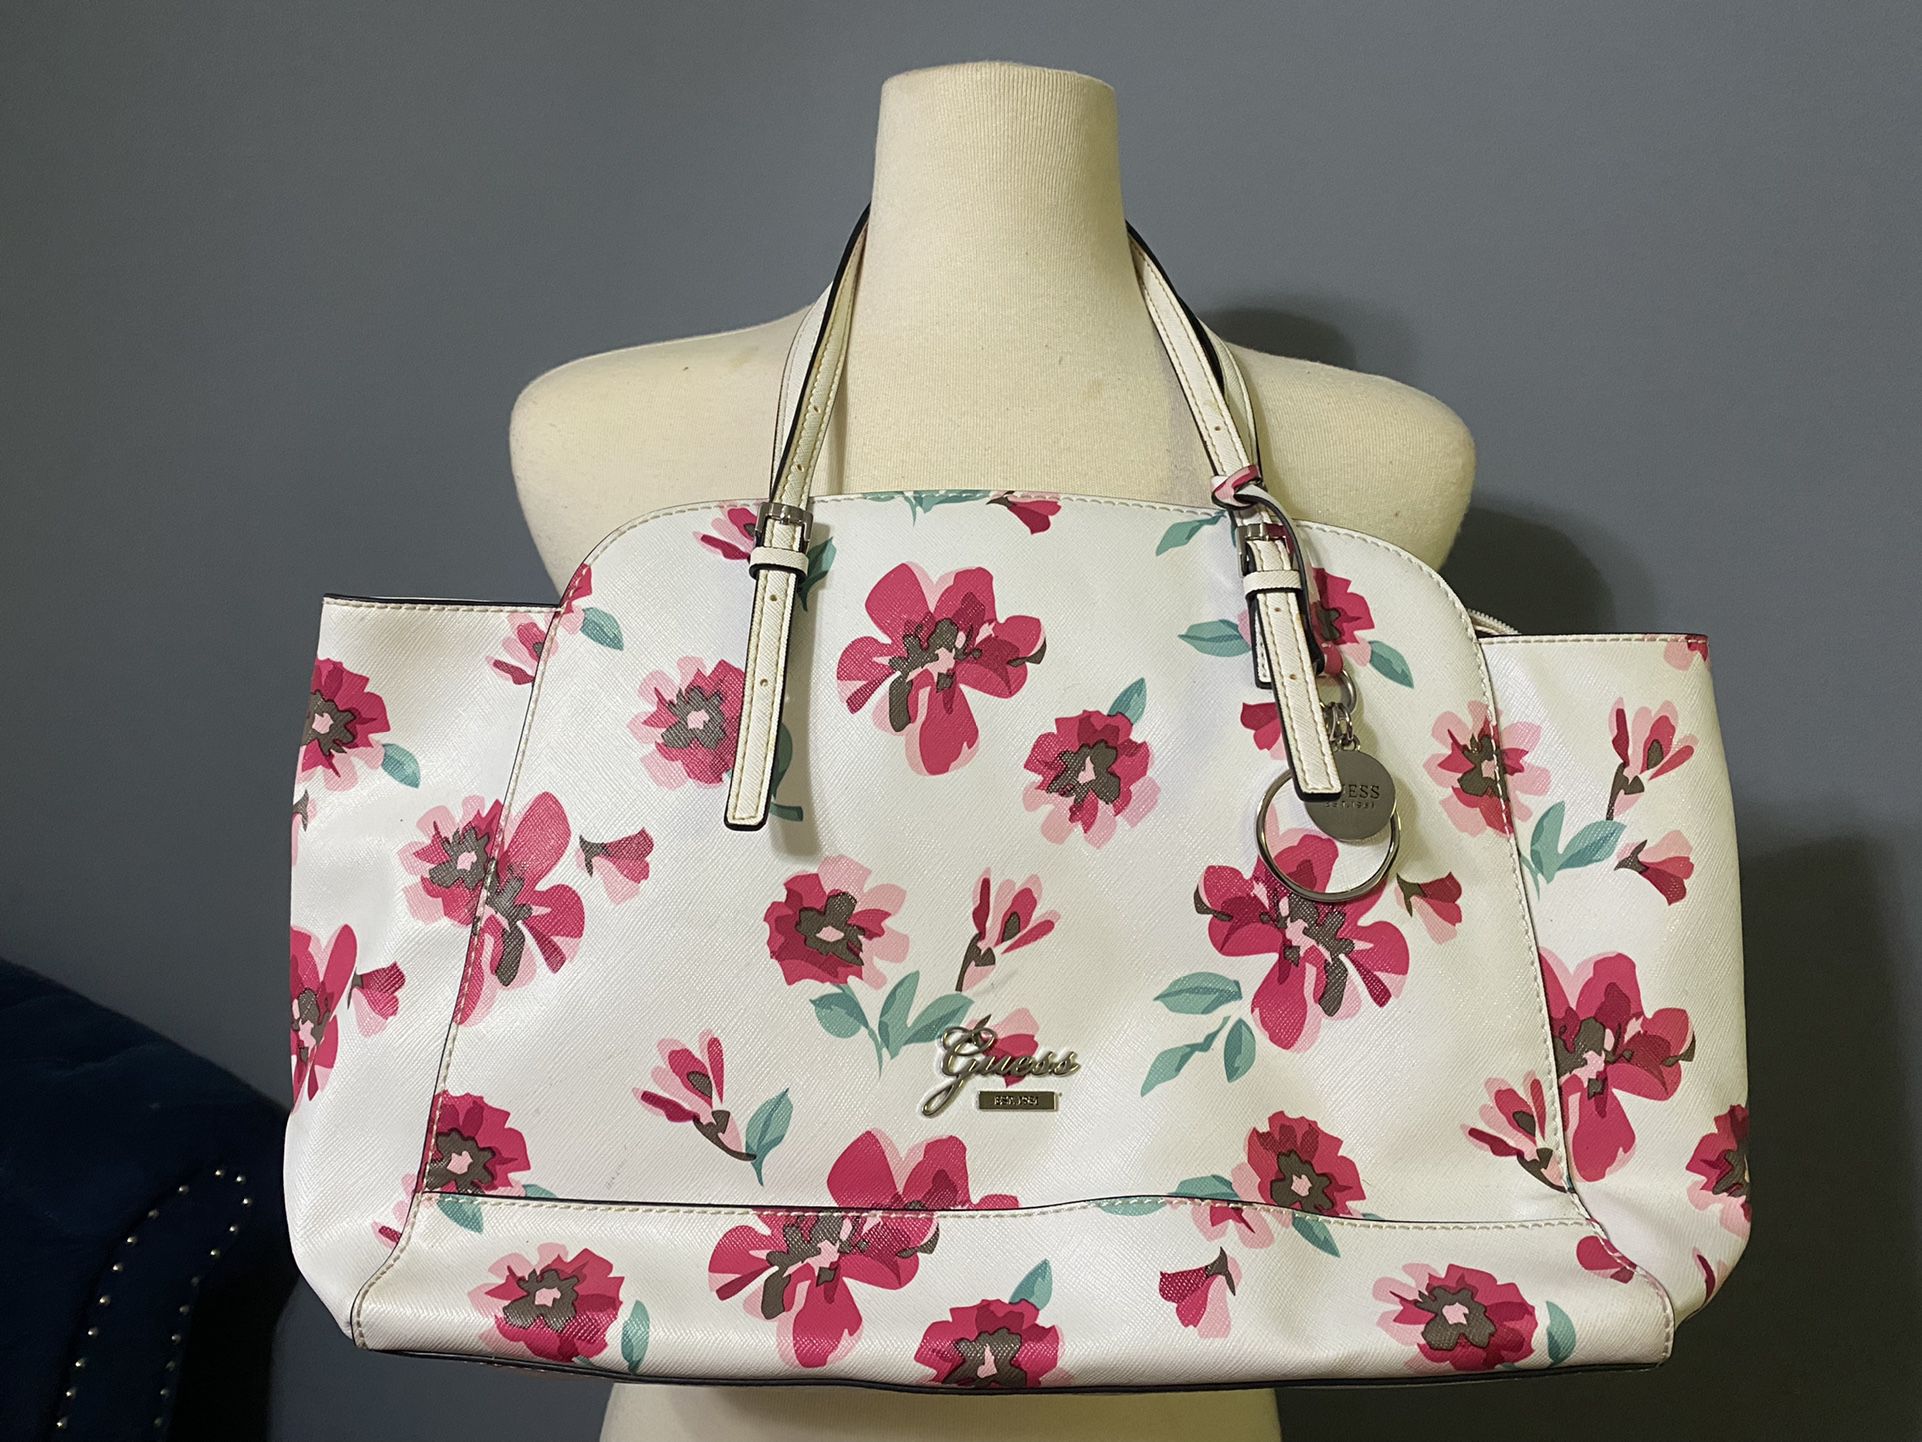 White and Floral Print Leather Guess Bag